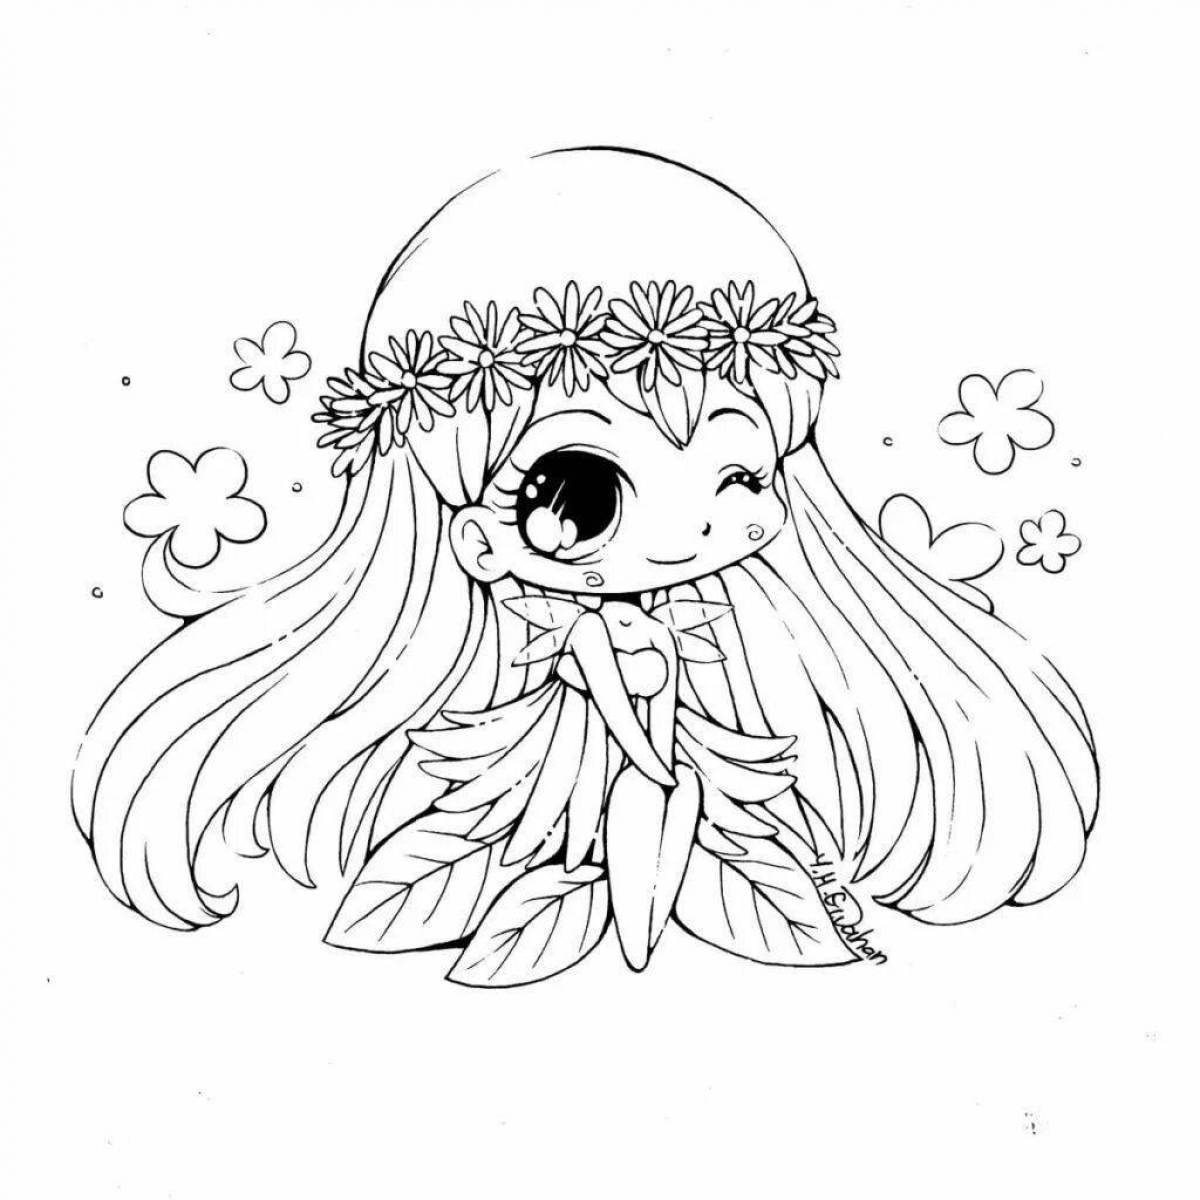 Exalted coloring pages for girls beautiful and cute